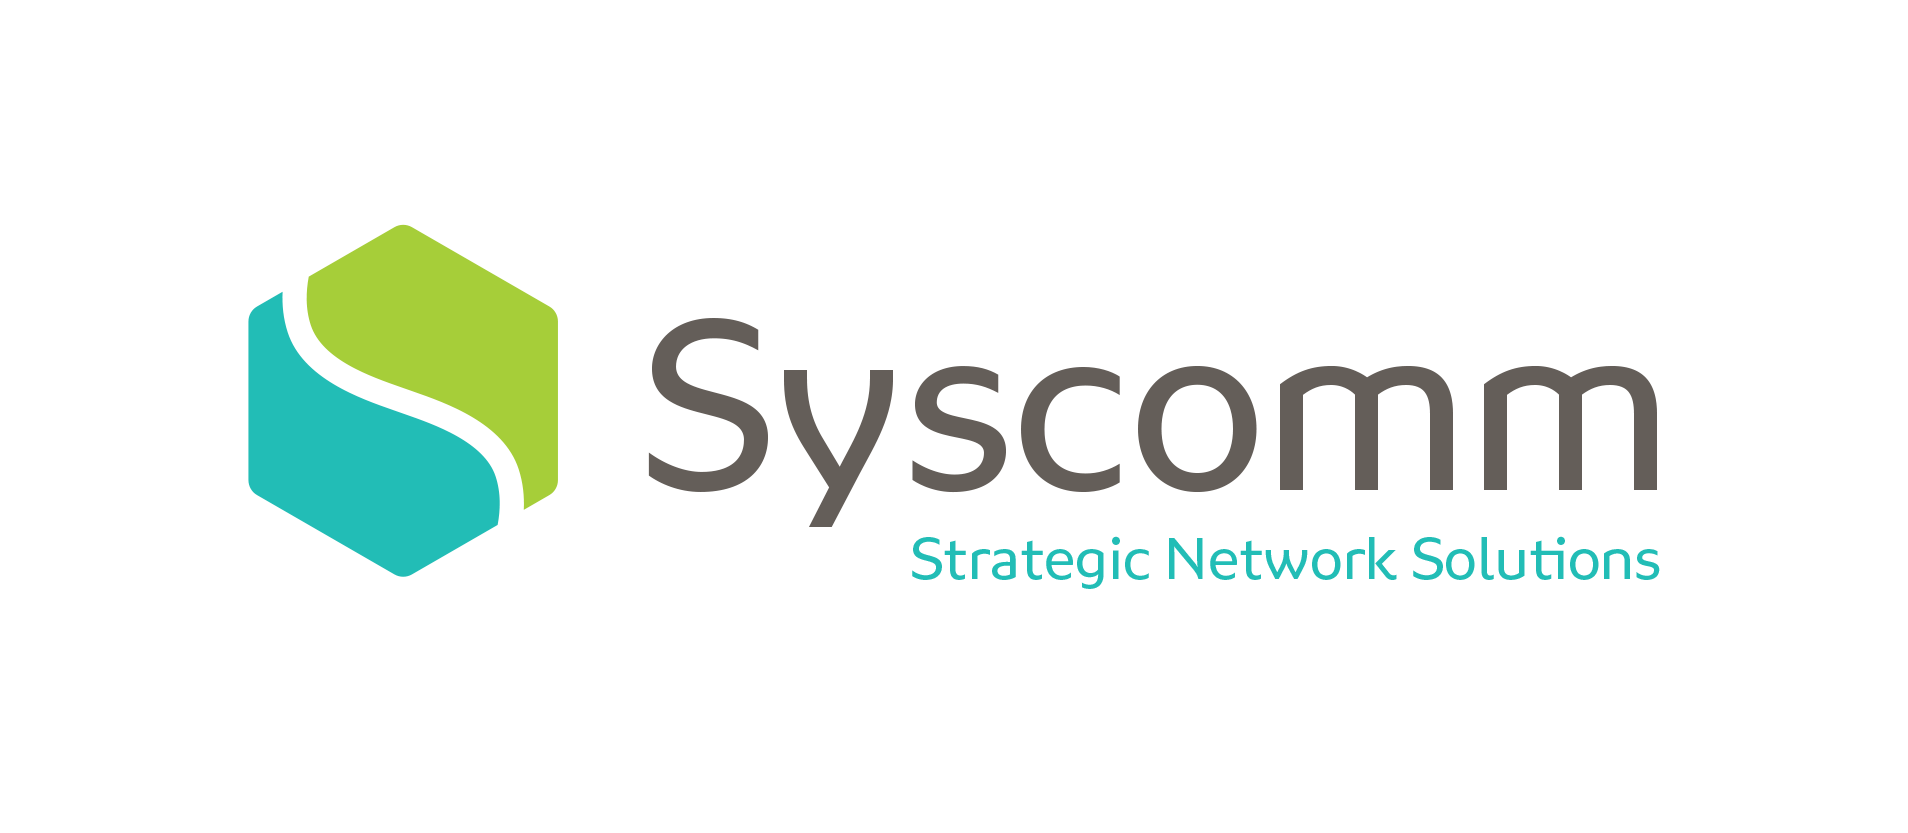 Syscomm logo with the strap line Strategic Network Solutions. 